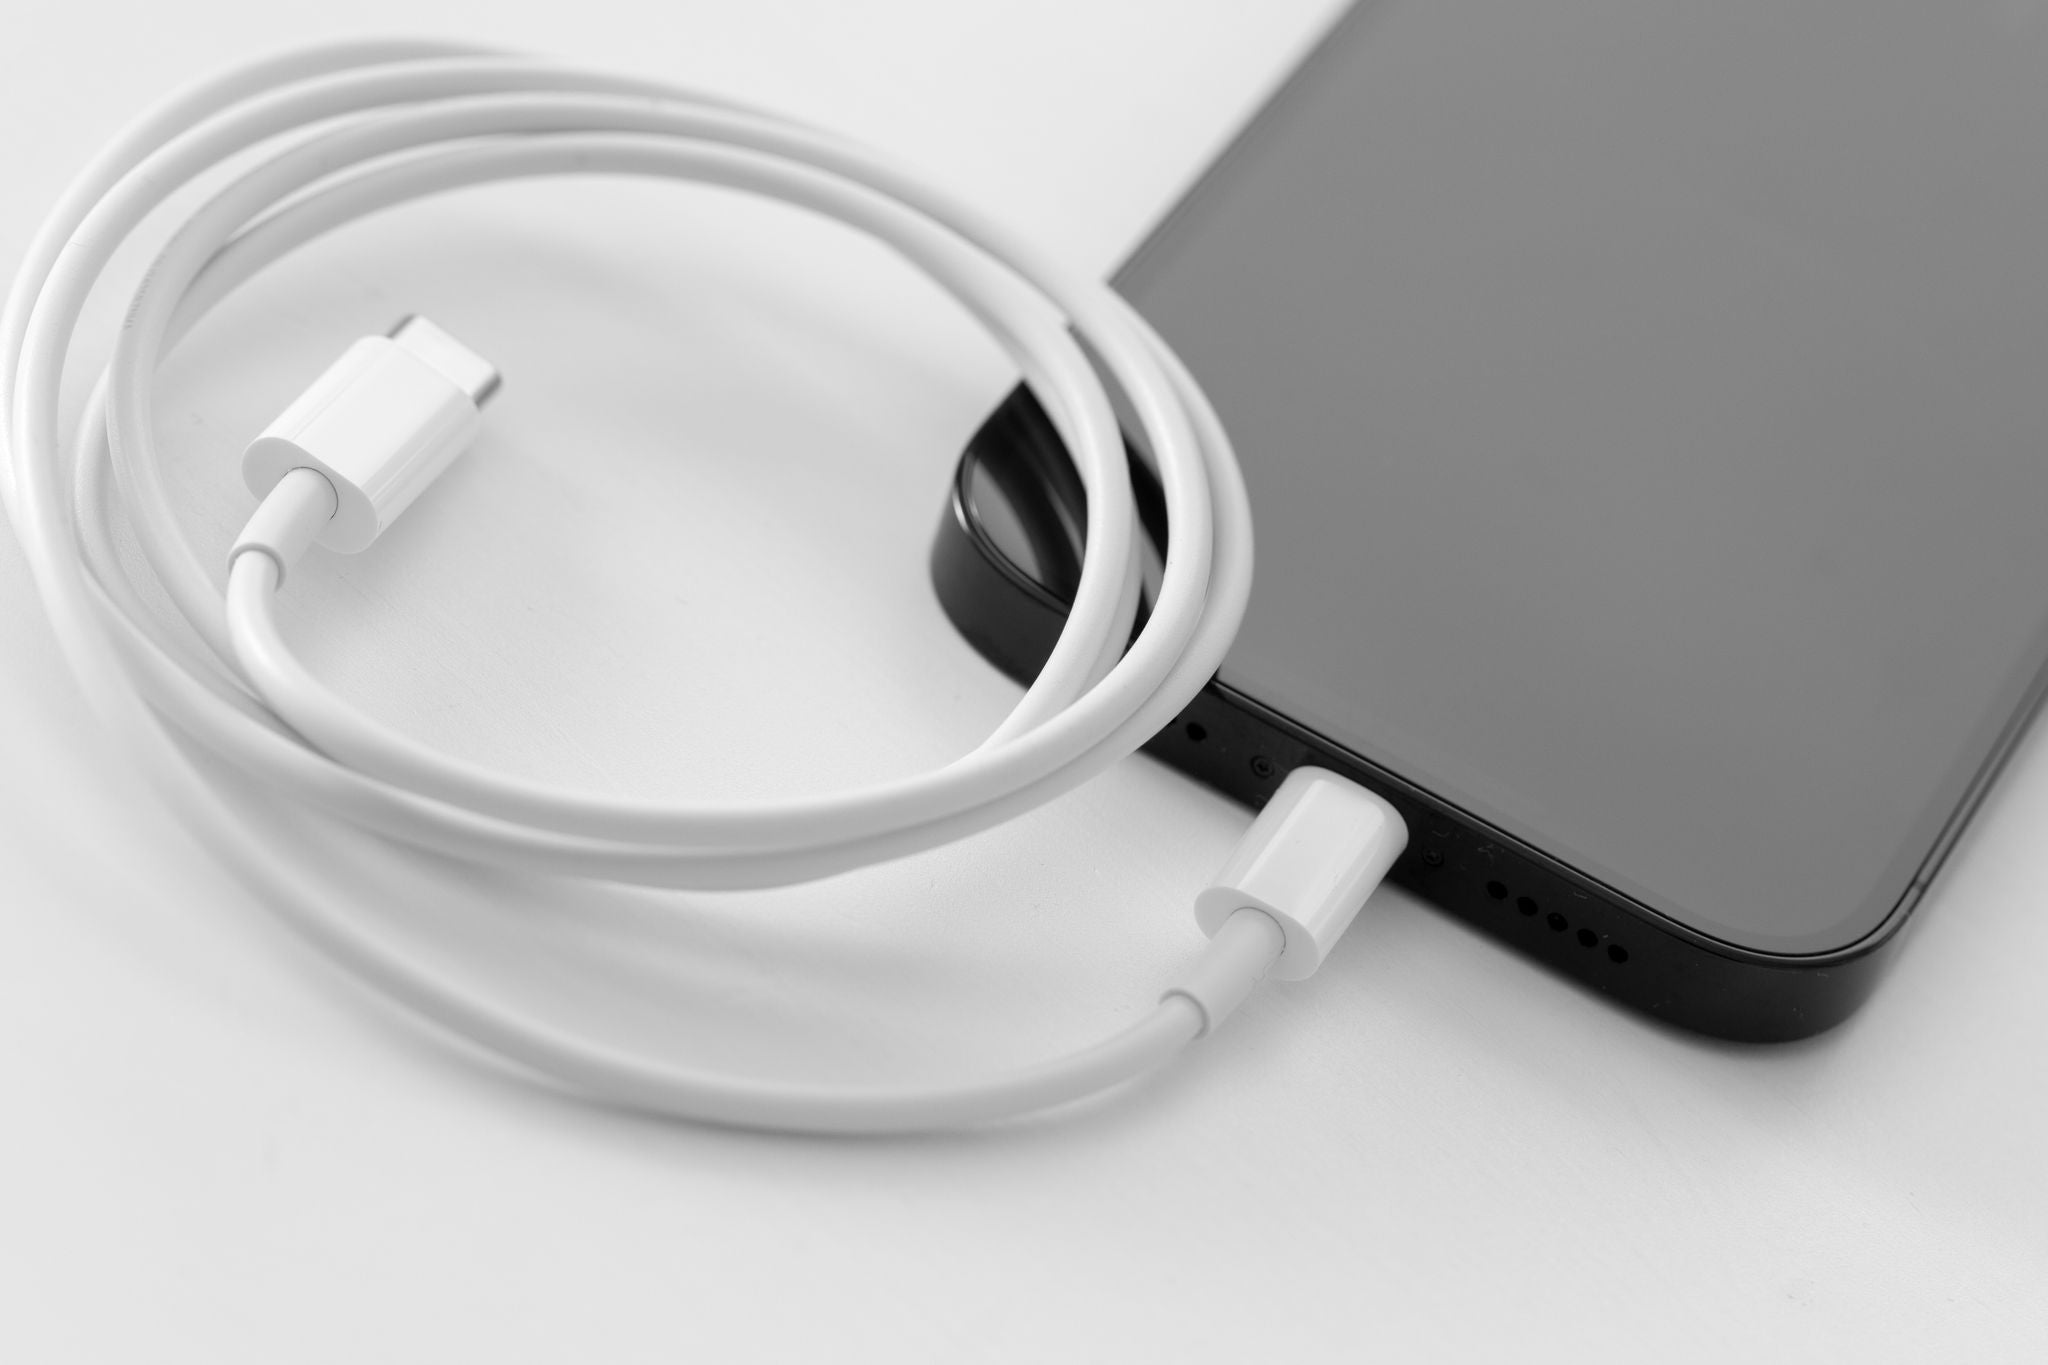 USB-C cable with plugged into mobile